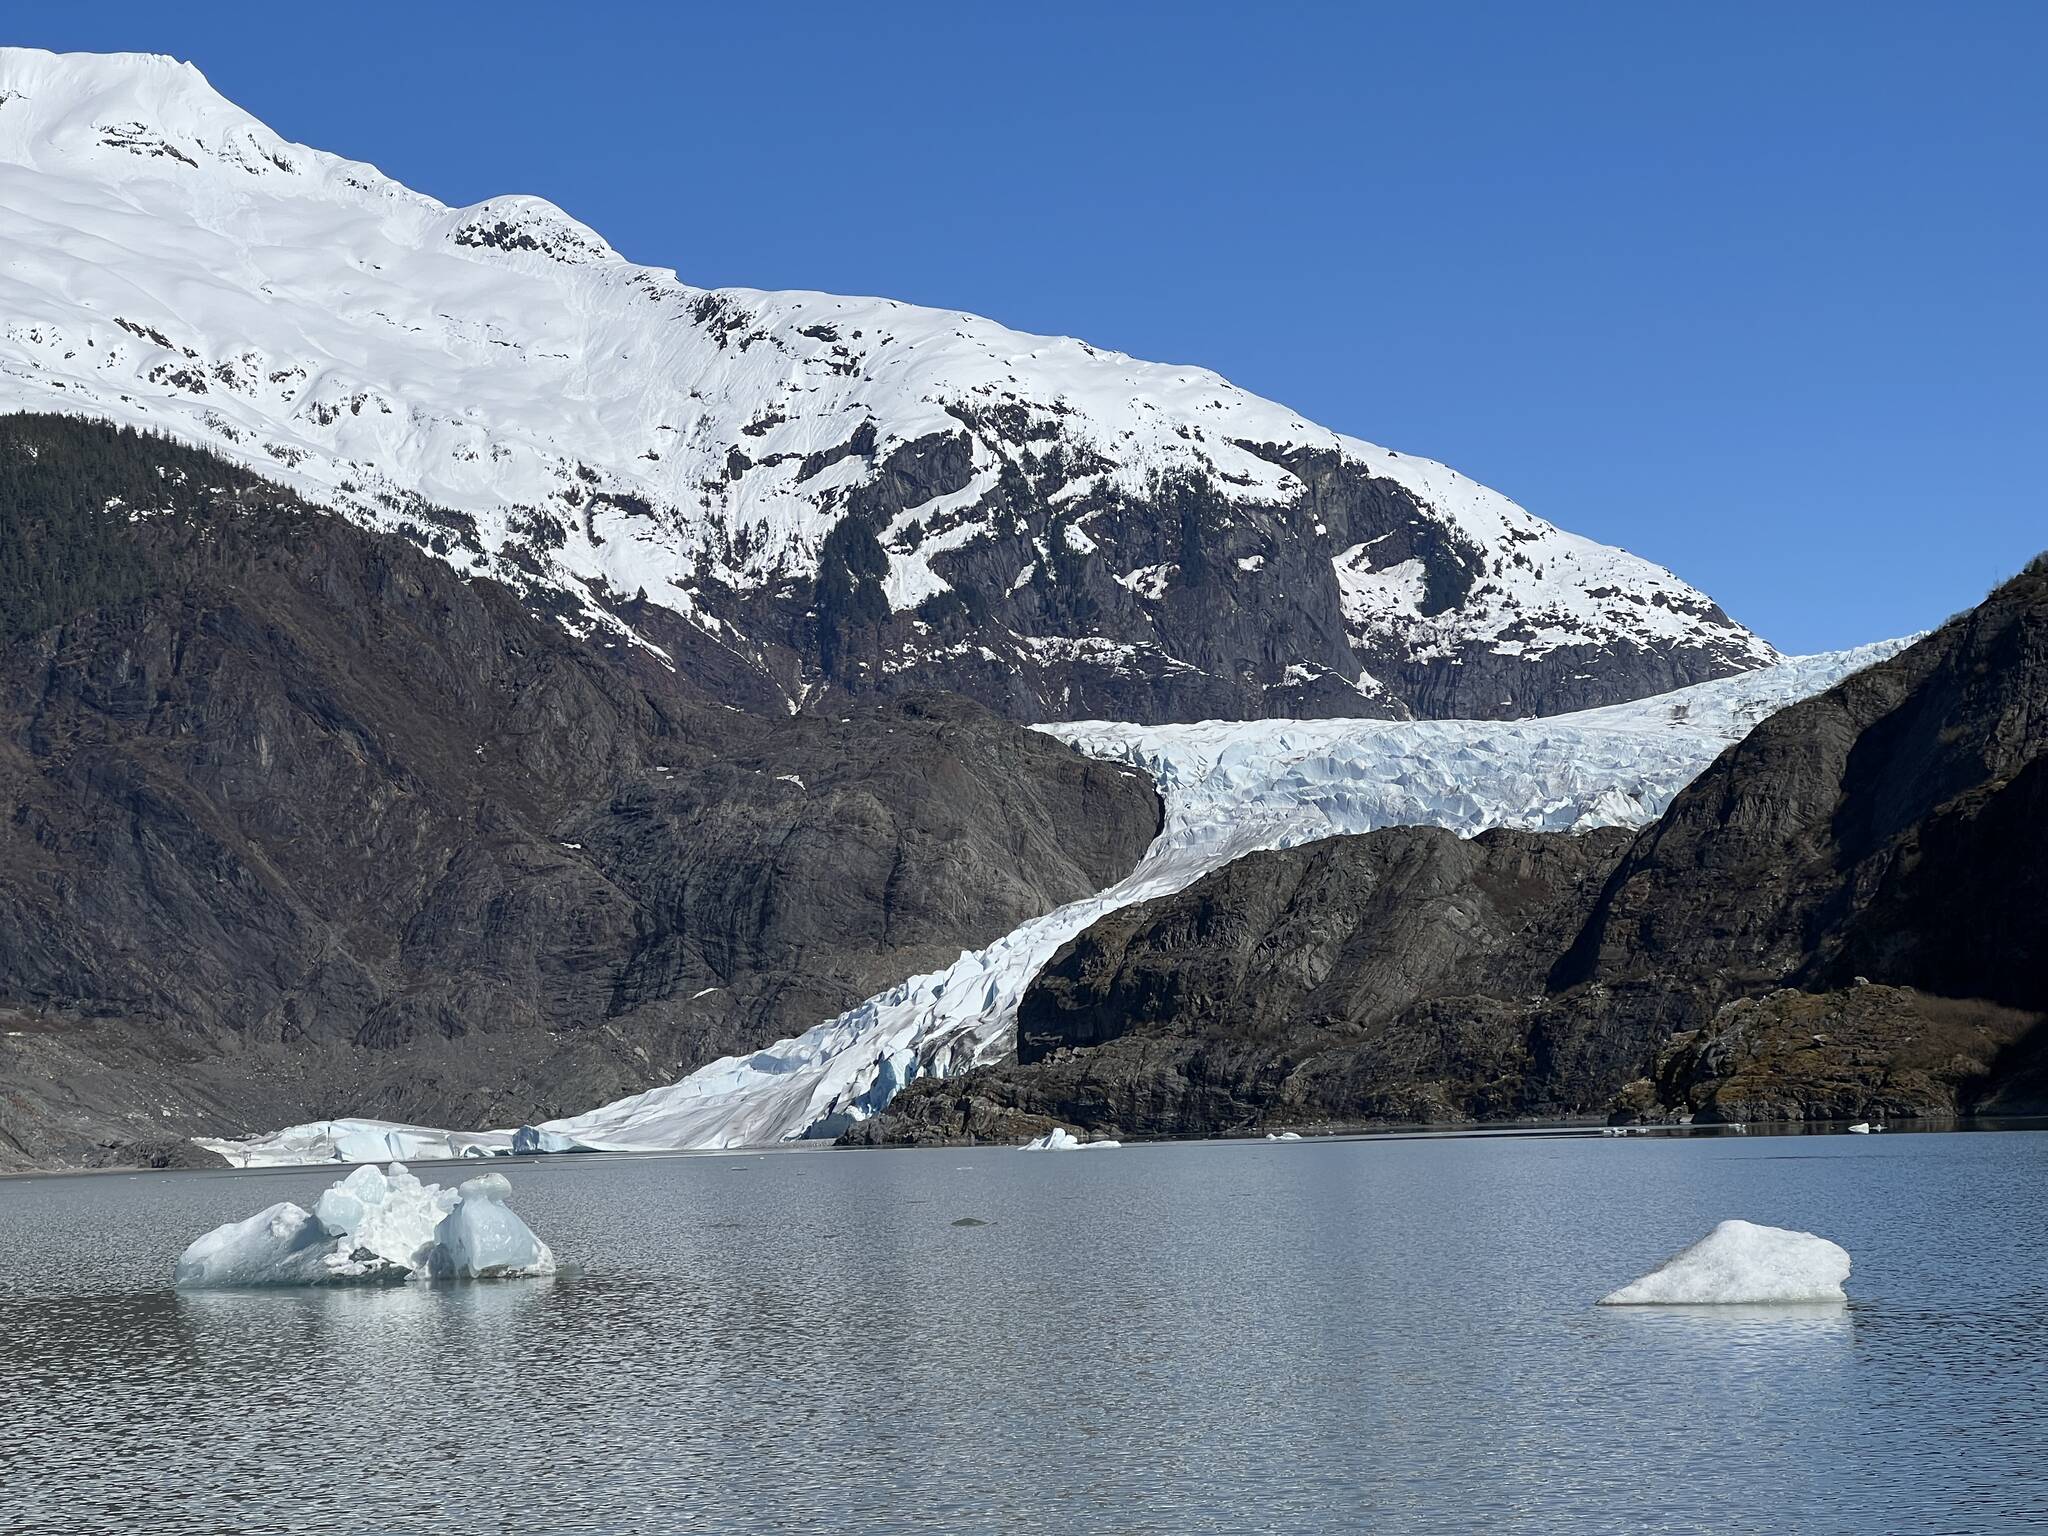 This photo shows the Mendenhall Glacier on Saturday, April 30, along the Nugget Falls Trail. (Courtesy Photo / Deana Barajas)